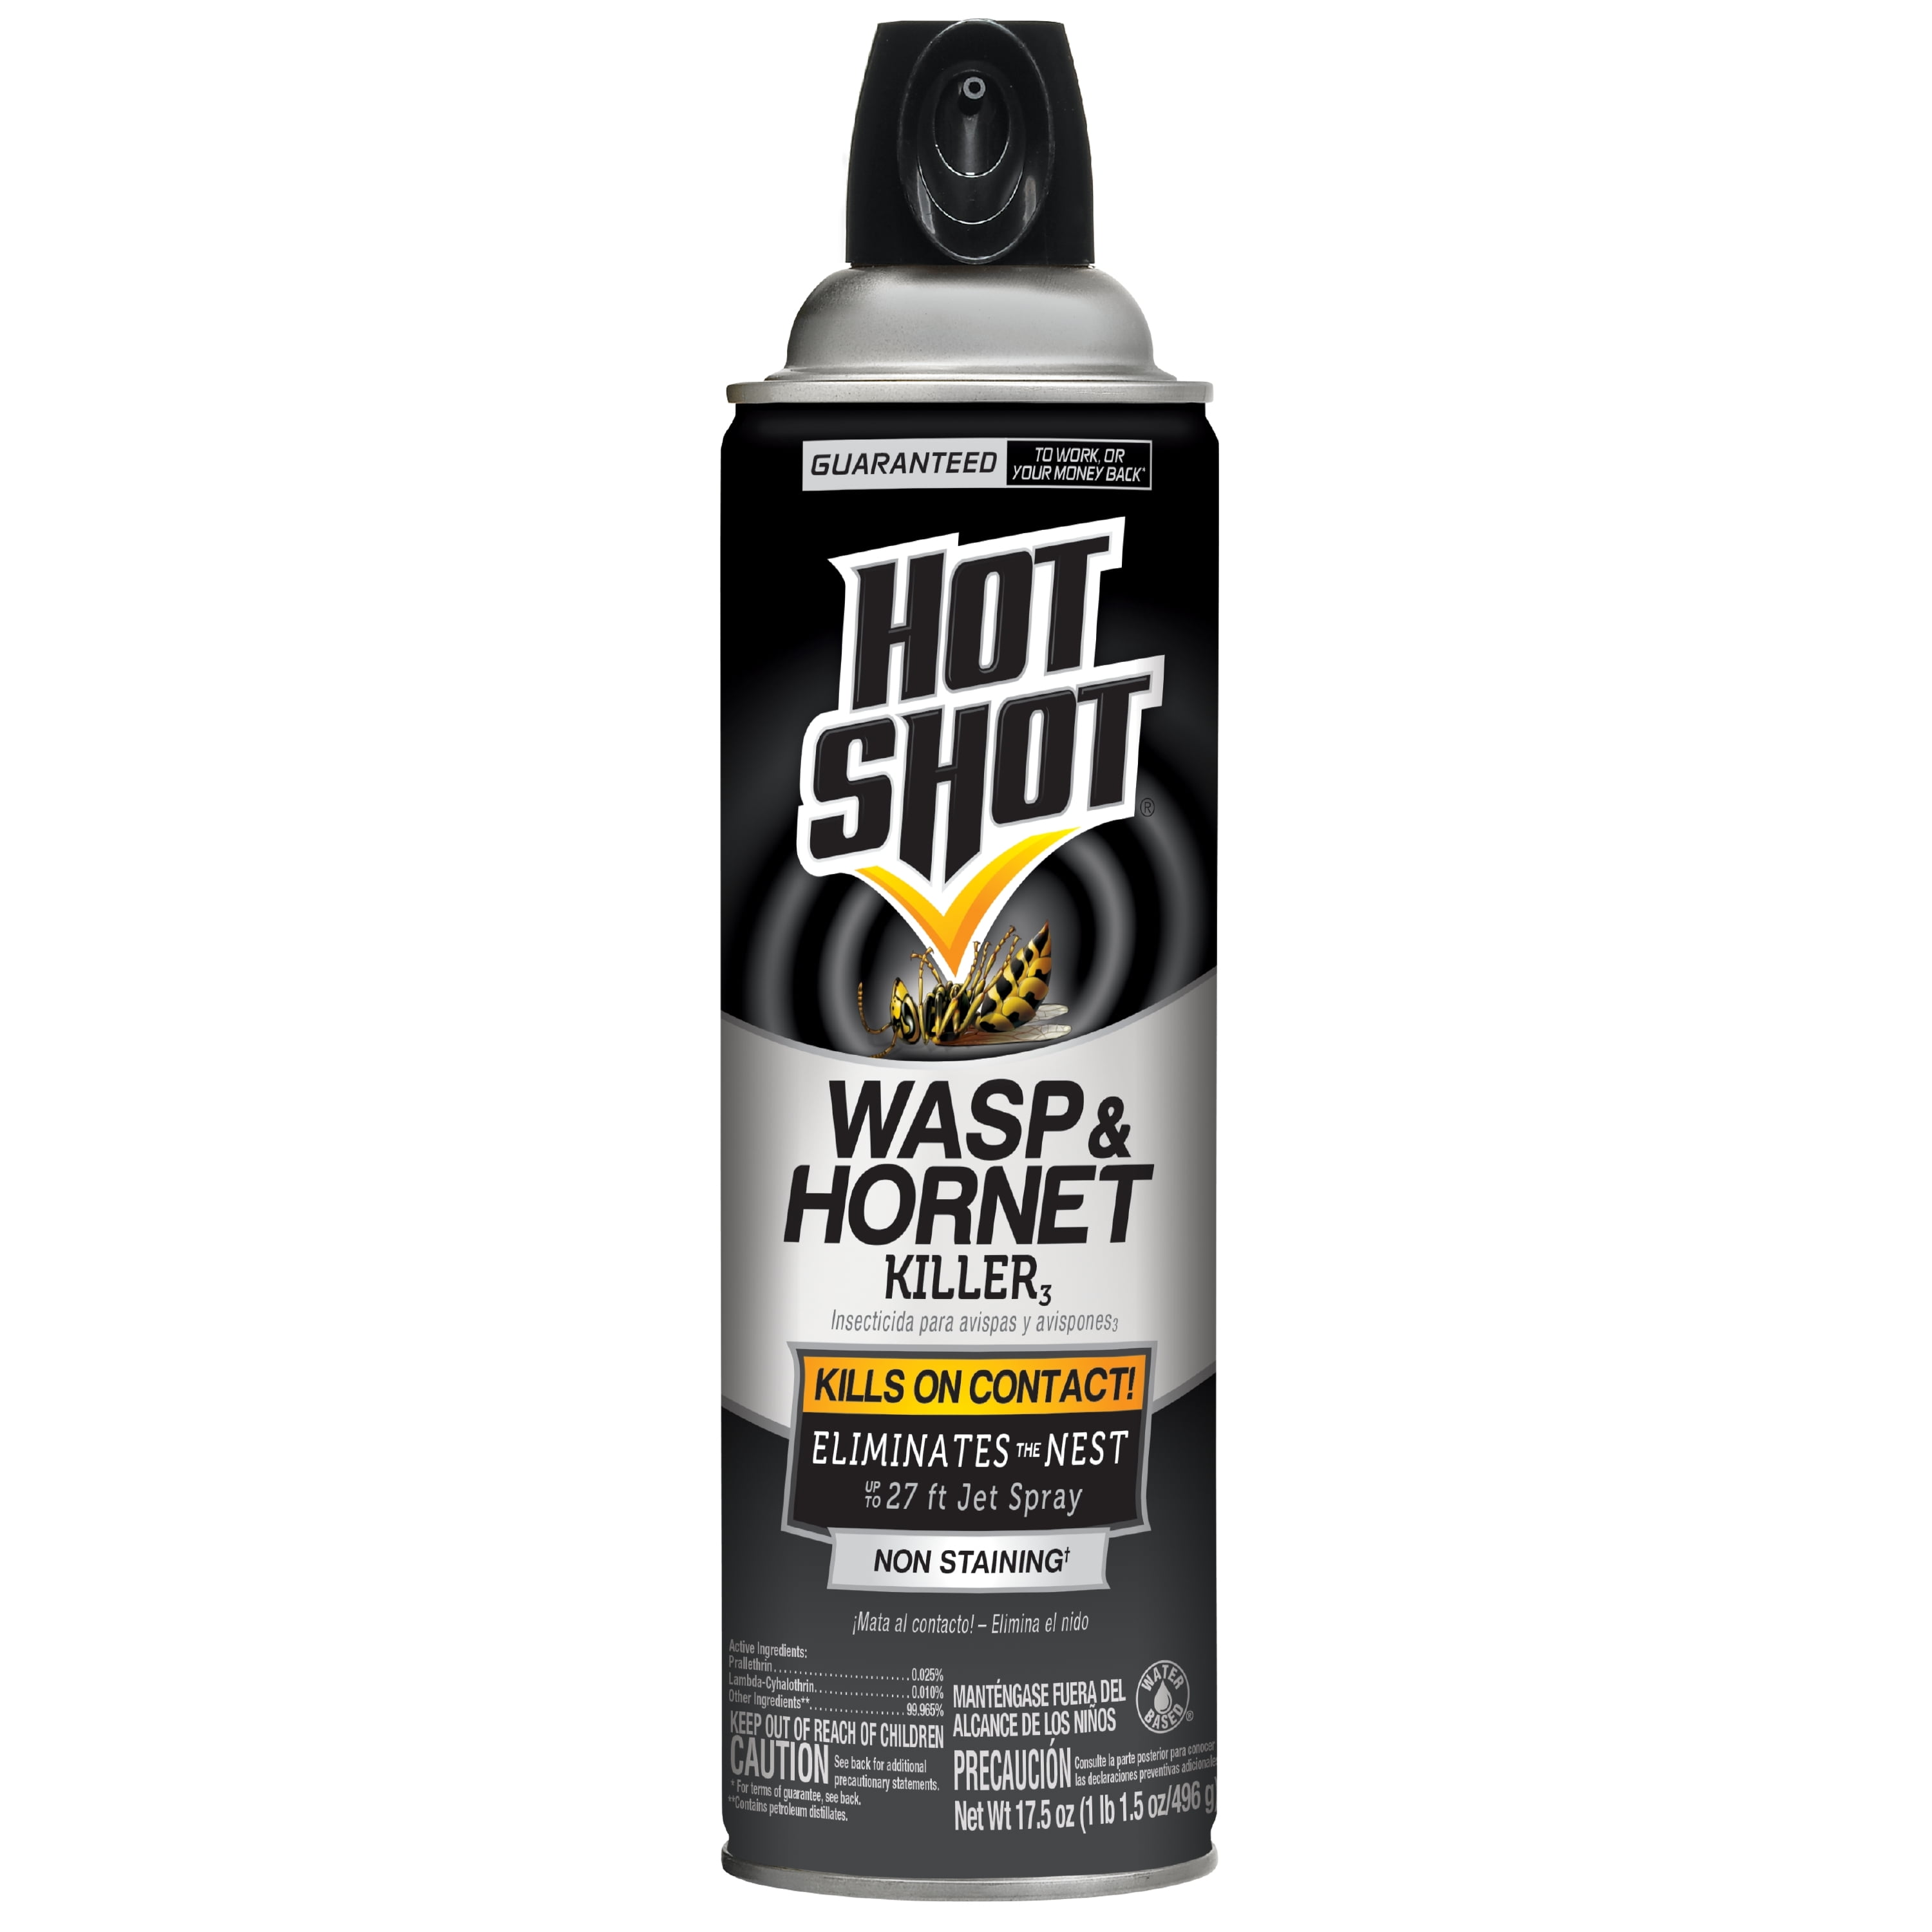 Hot Shot Wasp And Hornet Killer 17.5 Ounces, Up to 27 Foot Jet Spray